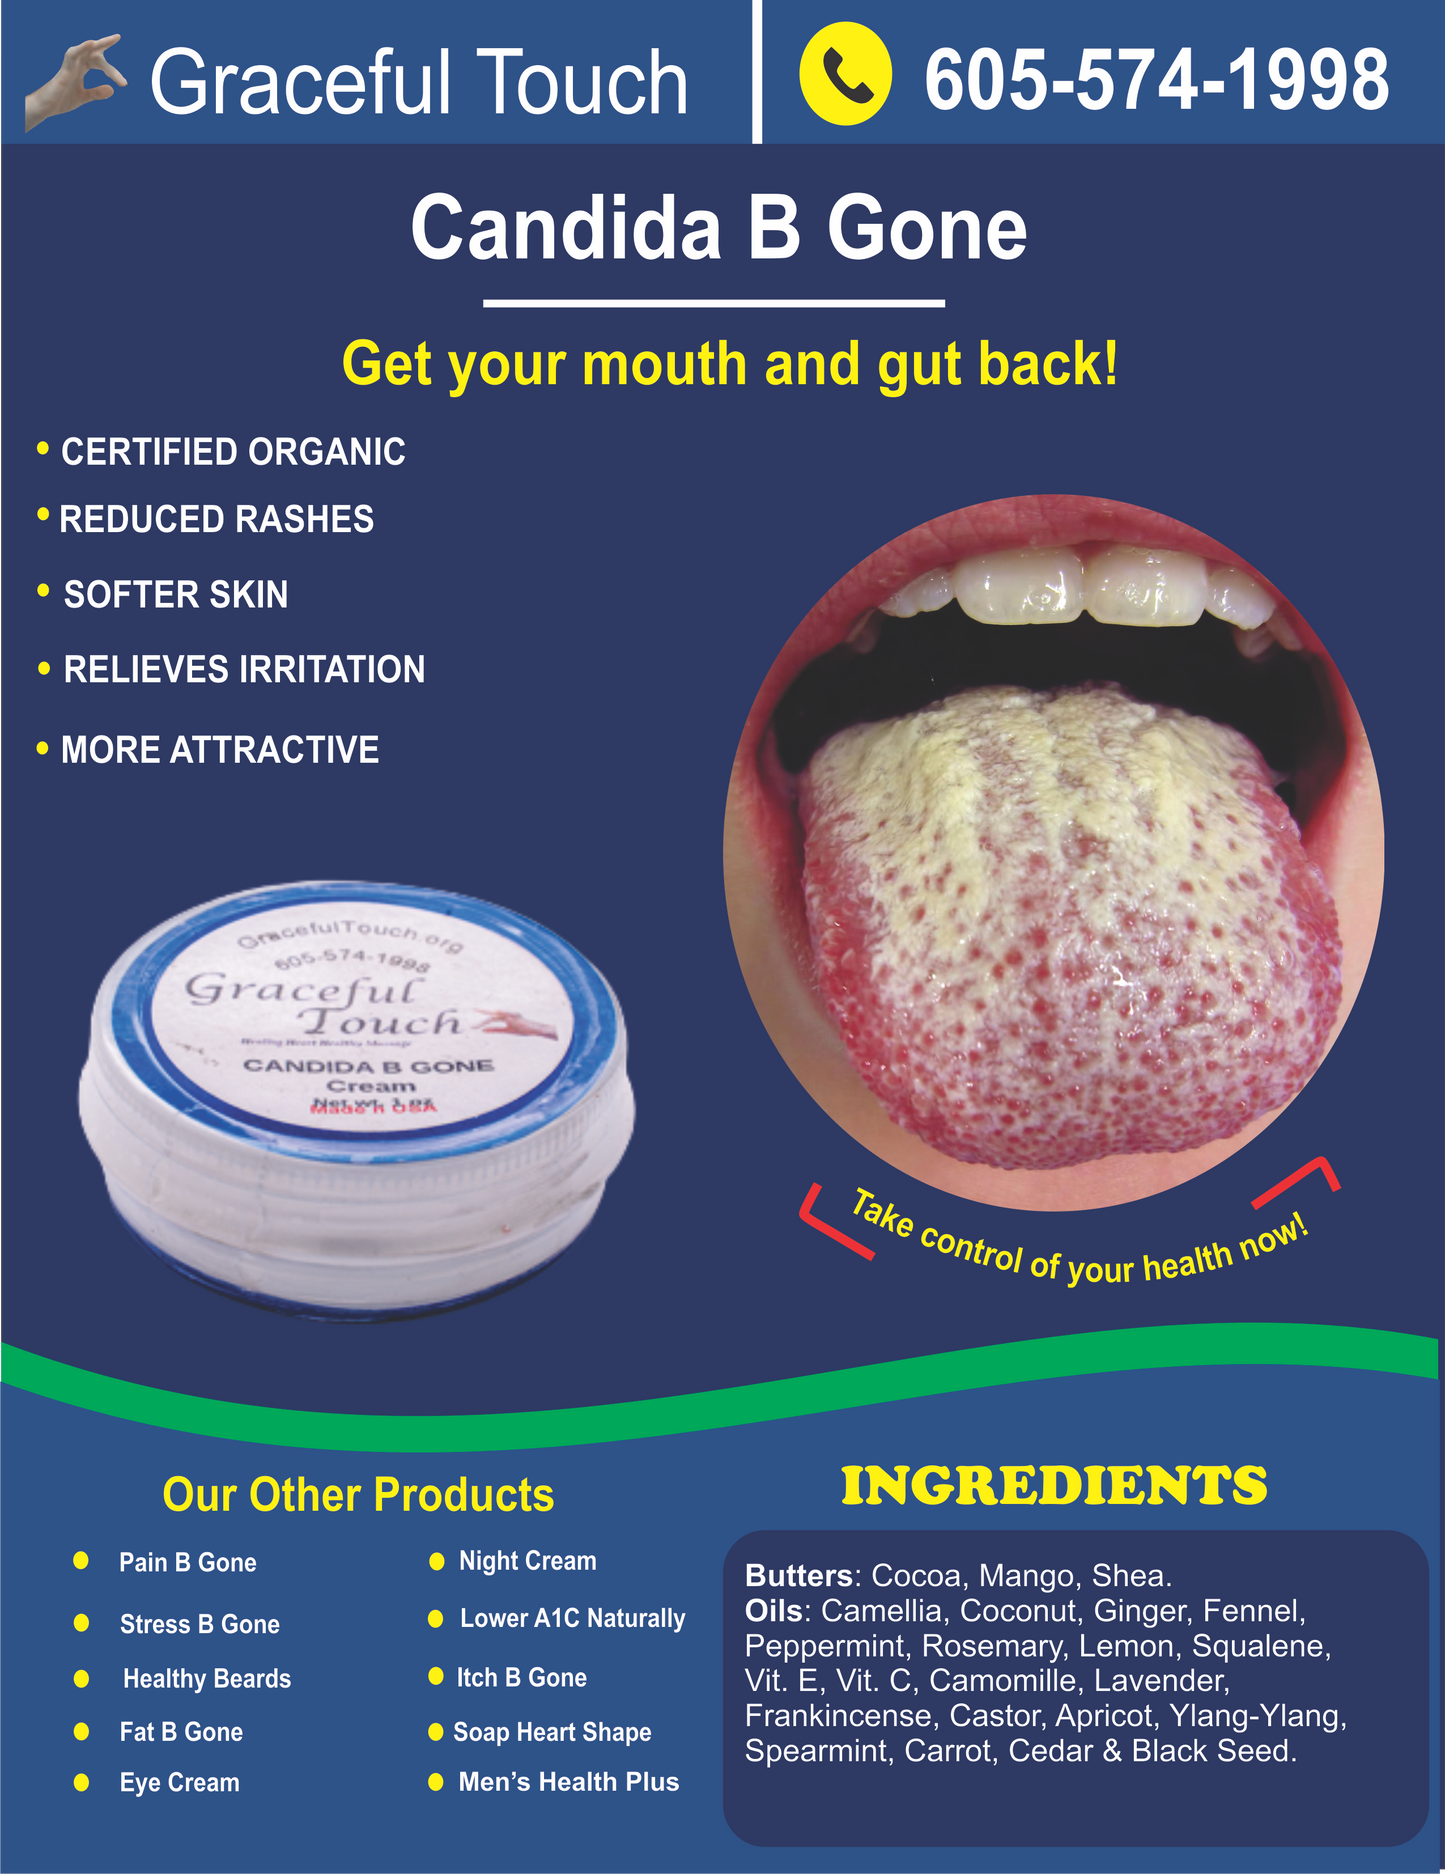 Candida B Gone: Candida Cream for Smooth and Cleaner Skin